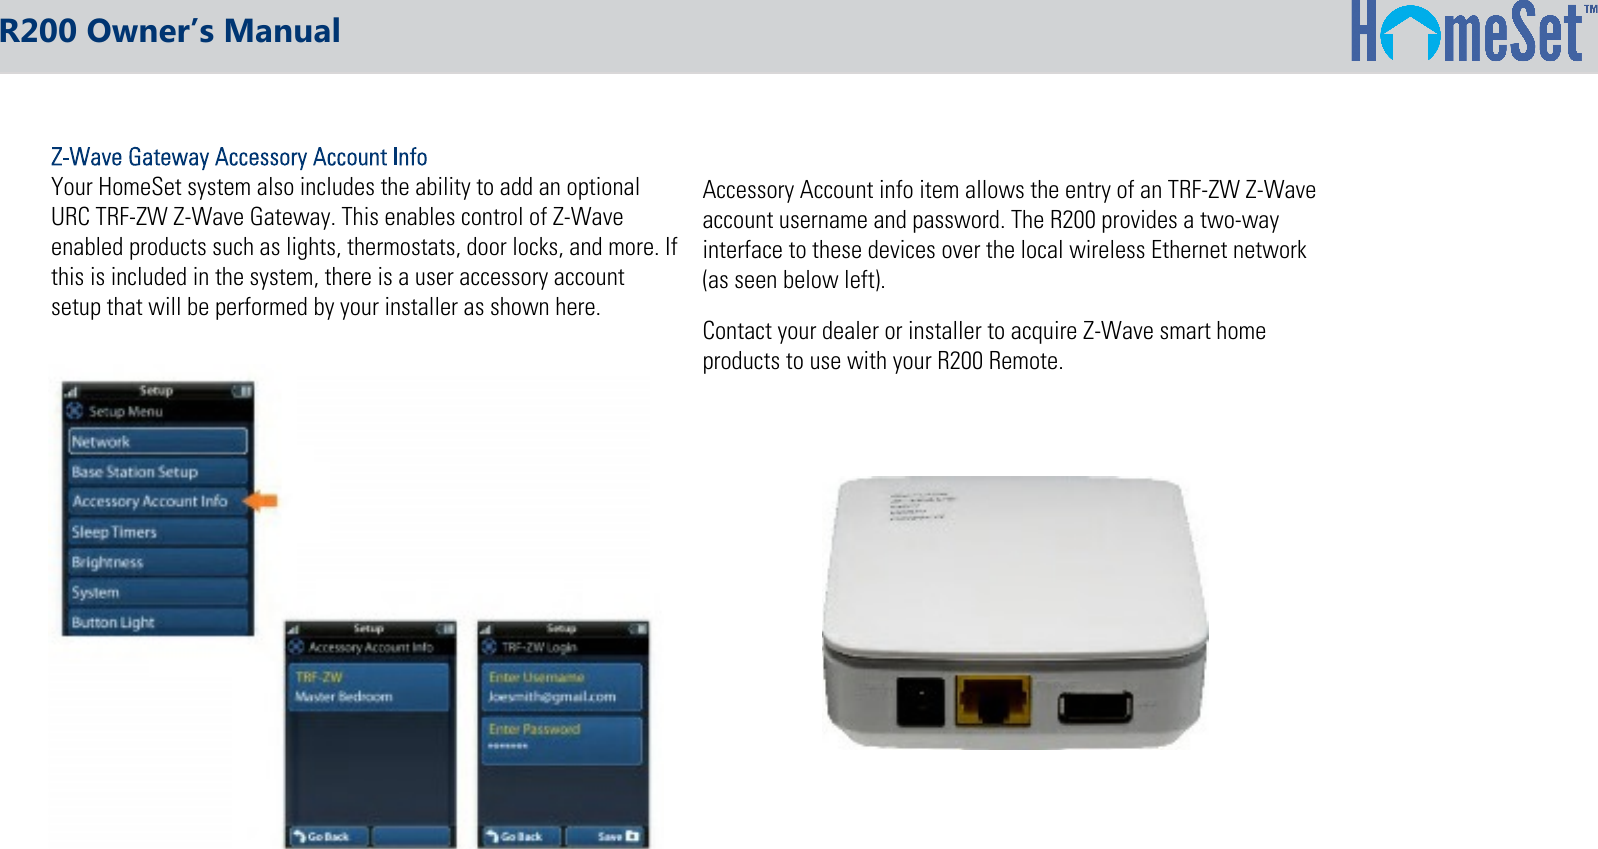 Your HomeSet system also includes the ability to add an optionalURC TRF-ZW Z-Wave Gateway. This enables control of Z-Waveenabled products such as lights, thermostats, door locks, and more. Ifthis is included in the system, there is a user accessory accountsetup that will be performed by your installer as shown here.Accessory Account info item allows the entry of an TRF-ZW Z-Waveaccount username and password. The R200 provides a two-wayinterface to these devices over the local wireless Ethernet network(as seen below left).Contact your dealer or installer to acquire Z-Wave smart homeproducts to use with your R200 Remote.R200 Owner’s Manual